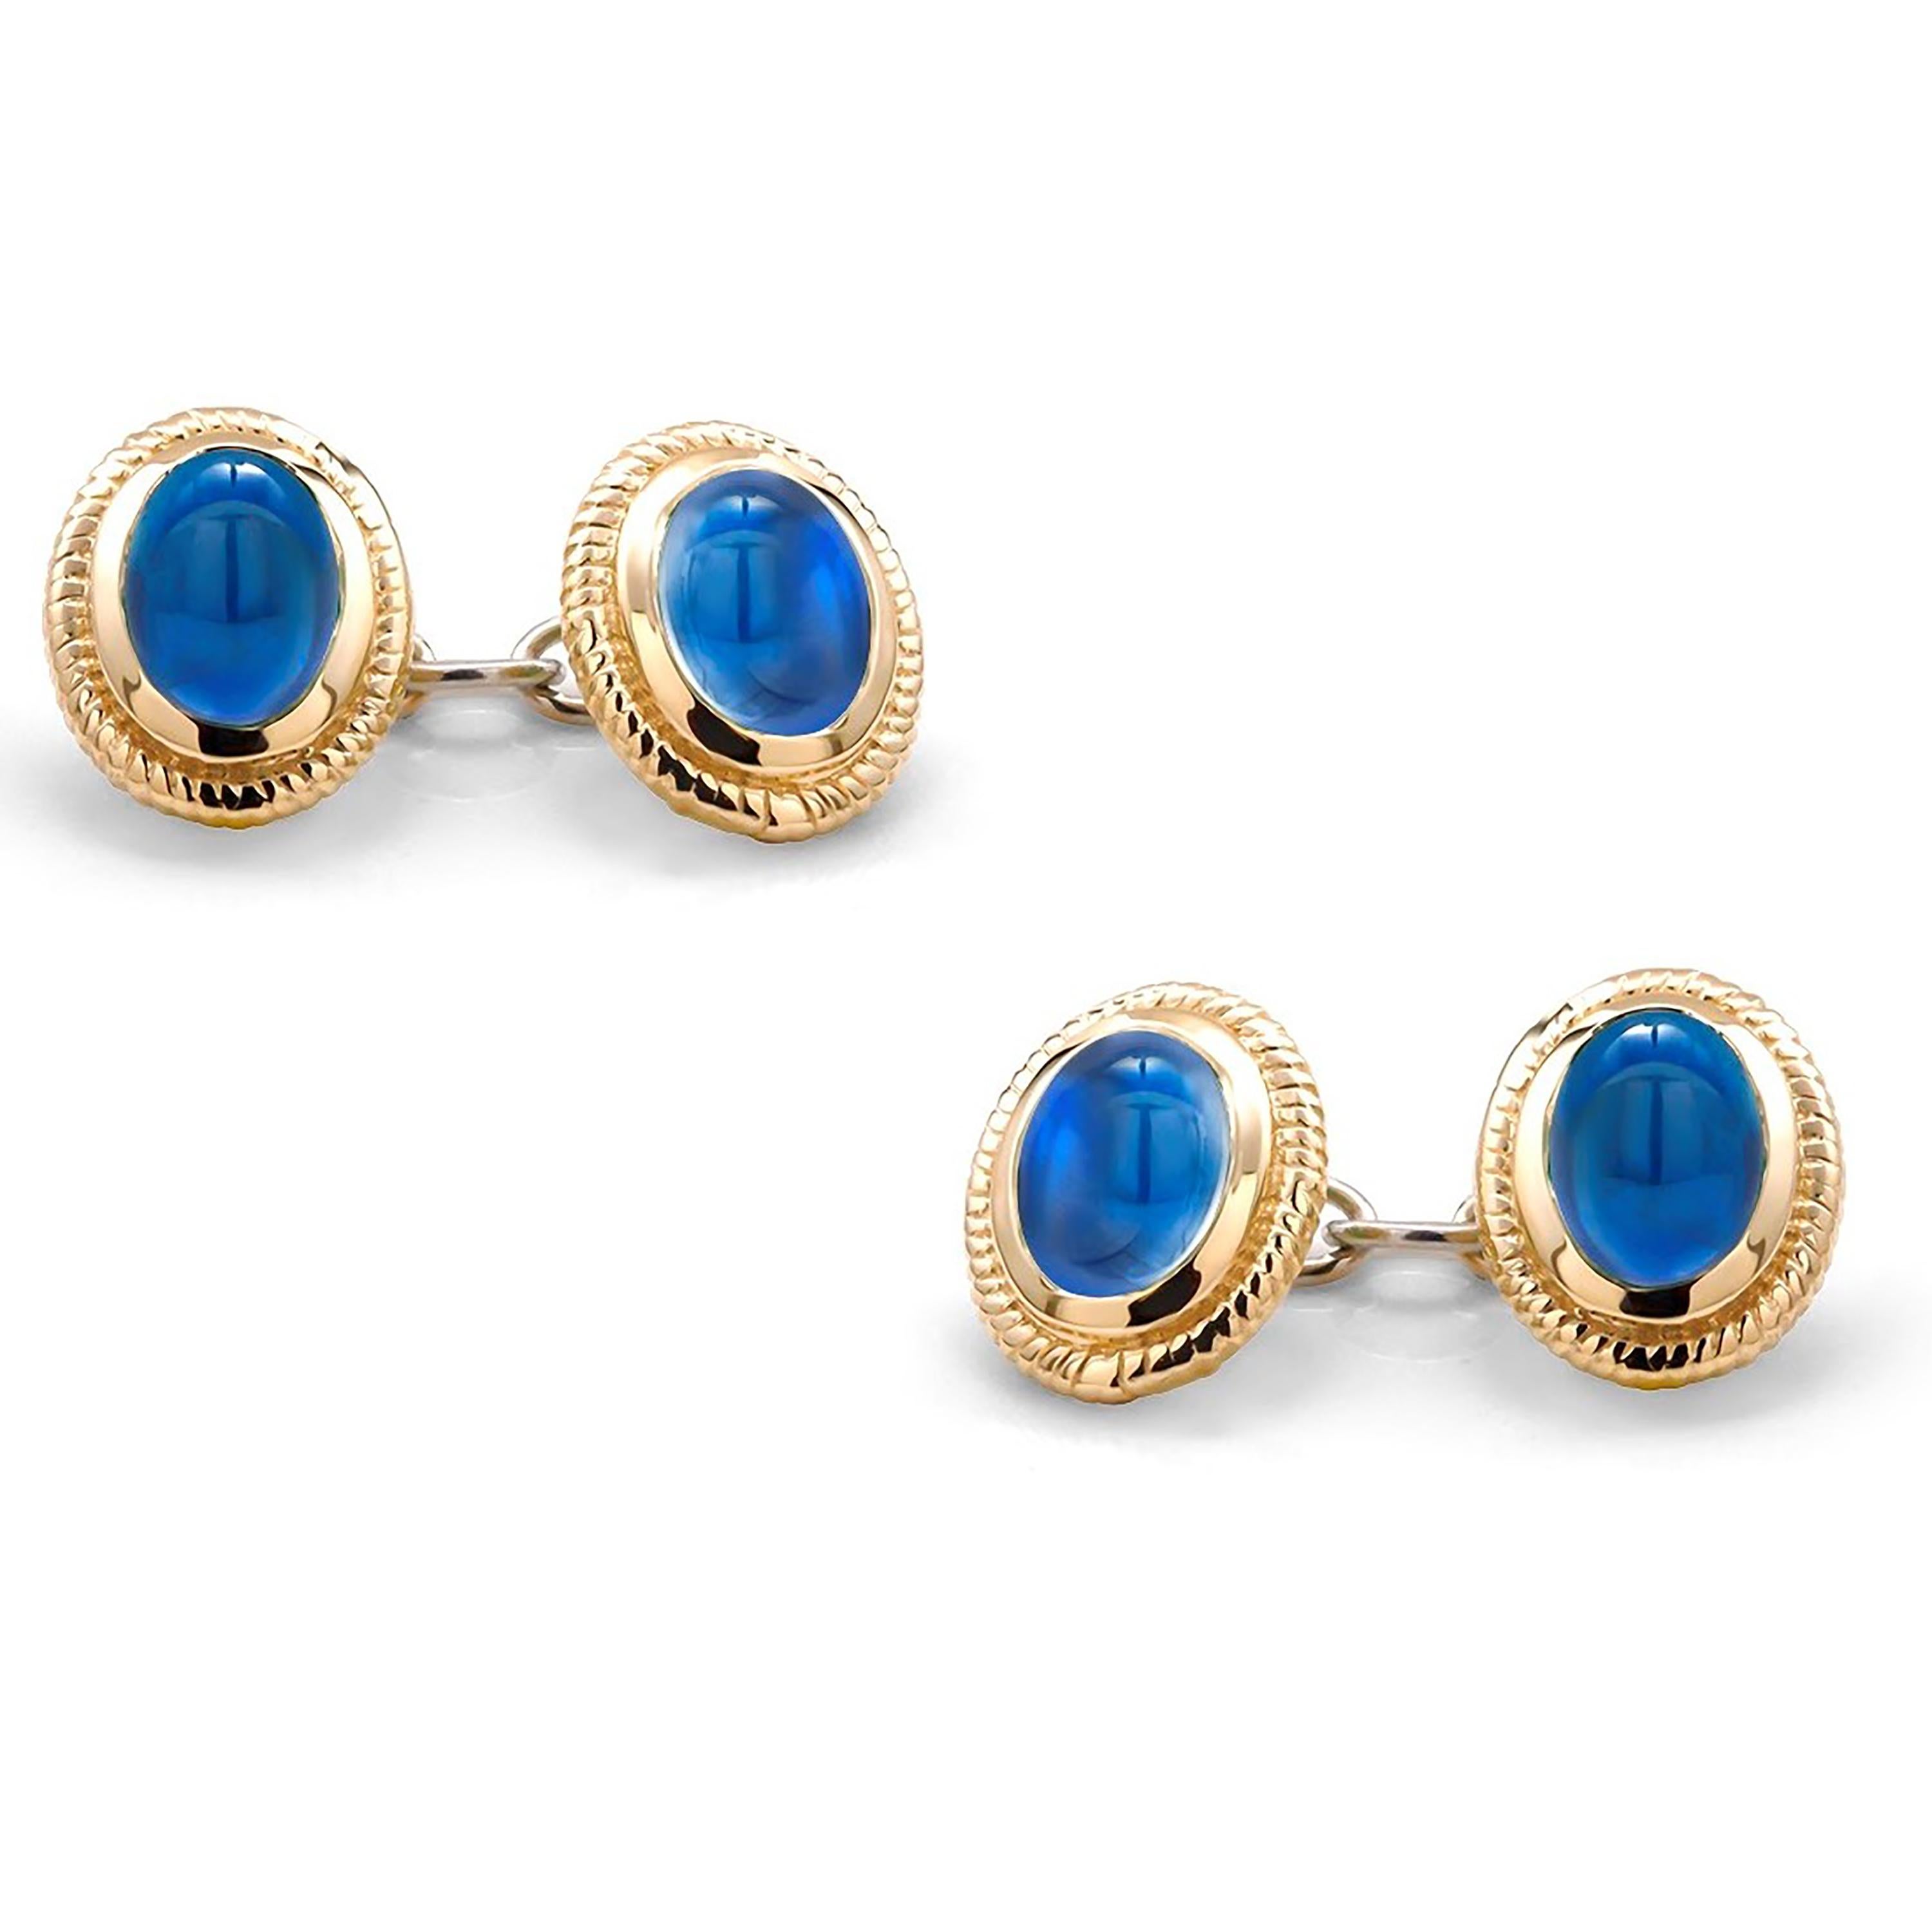 14 karats yellow gold fabulous pair of matching men’s double-sided chain link cufflinks
Four matching cabochon sapphire weighing 4.55 carats
Cufflinks measuring 0.35